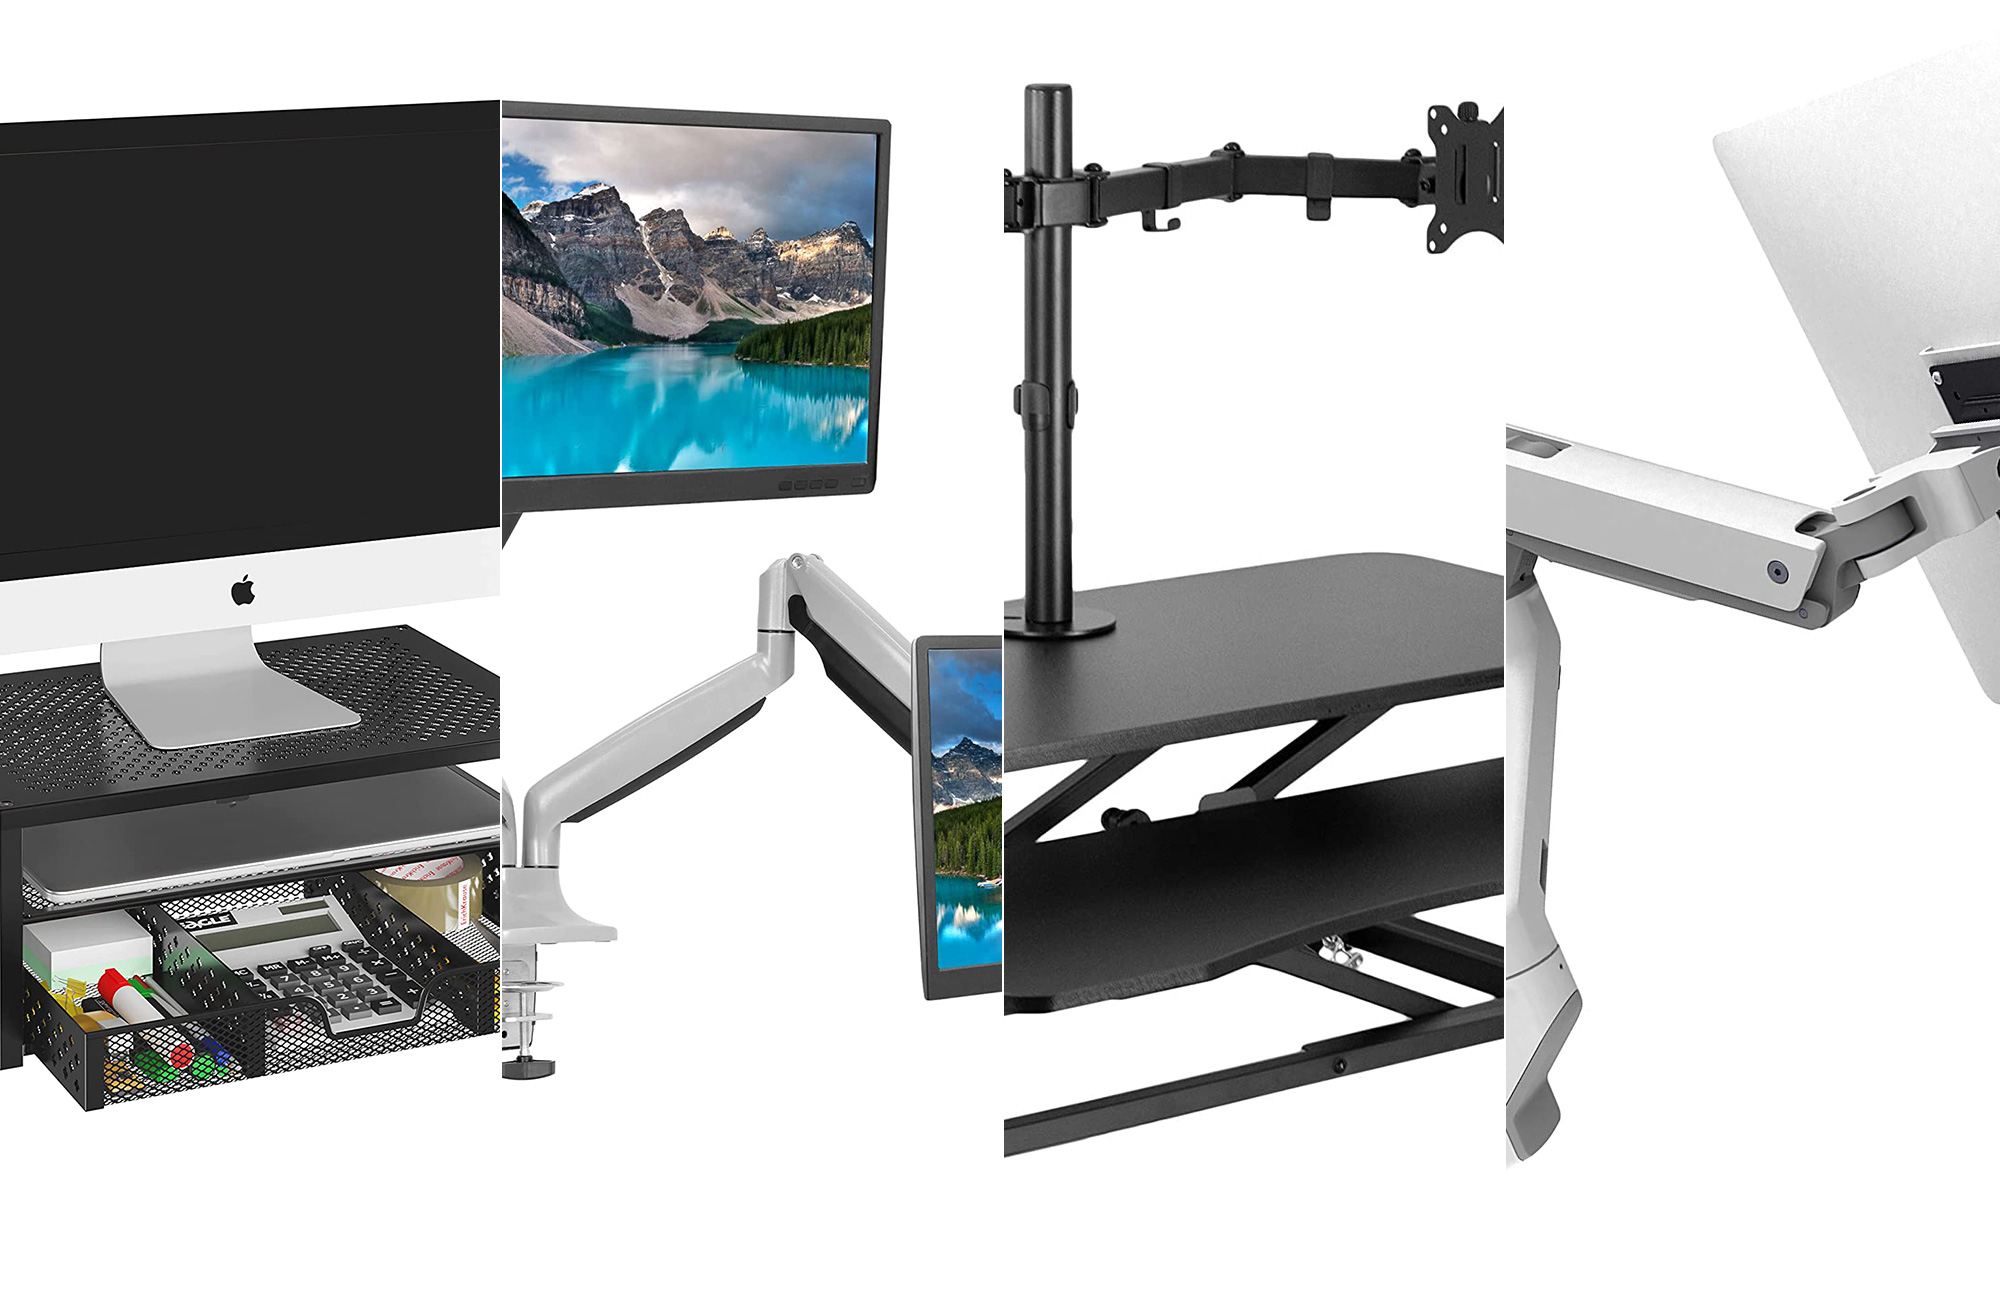 Monitor Arm and Stand for Desk